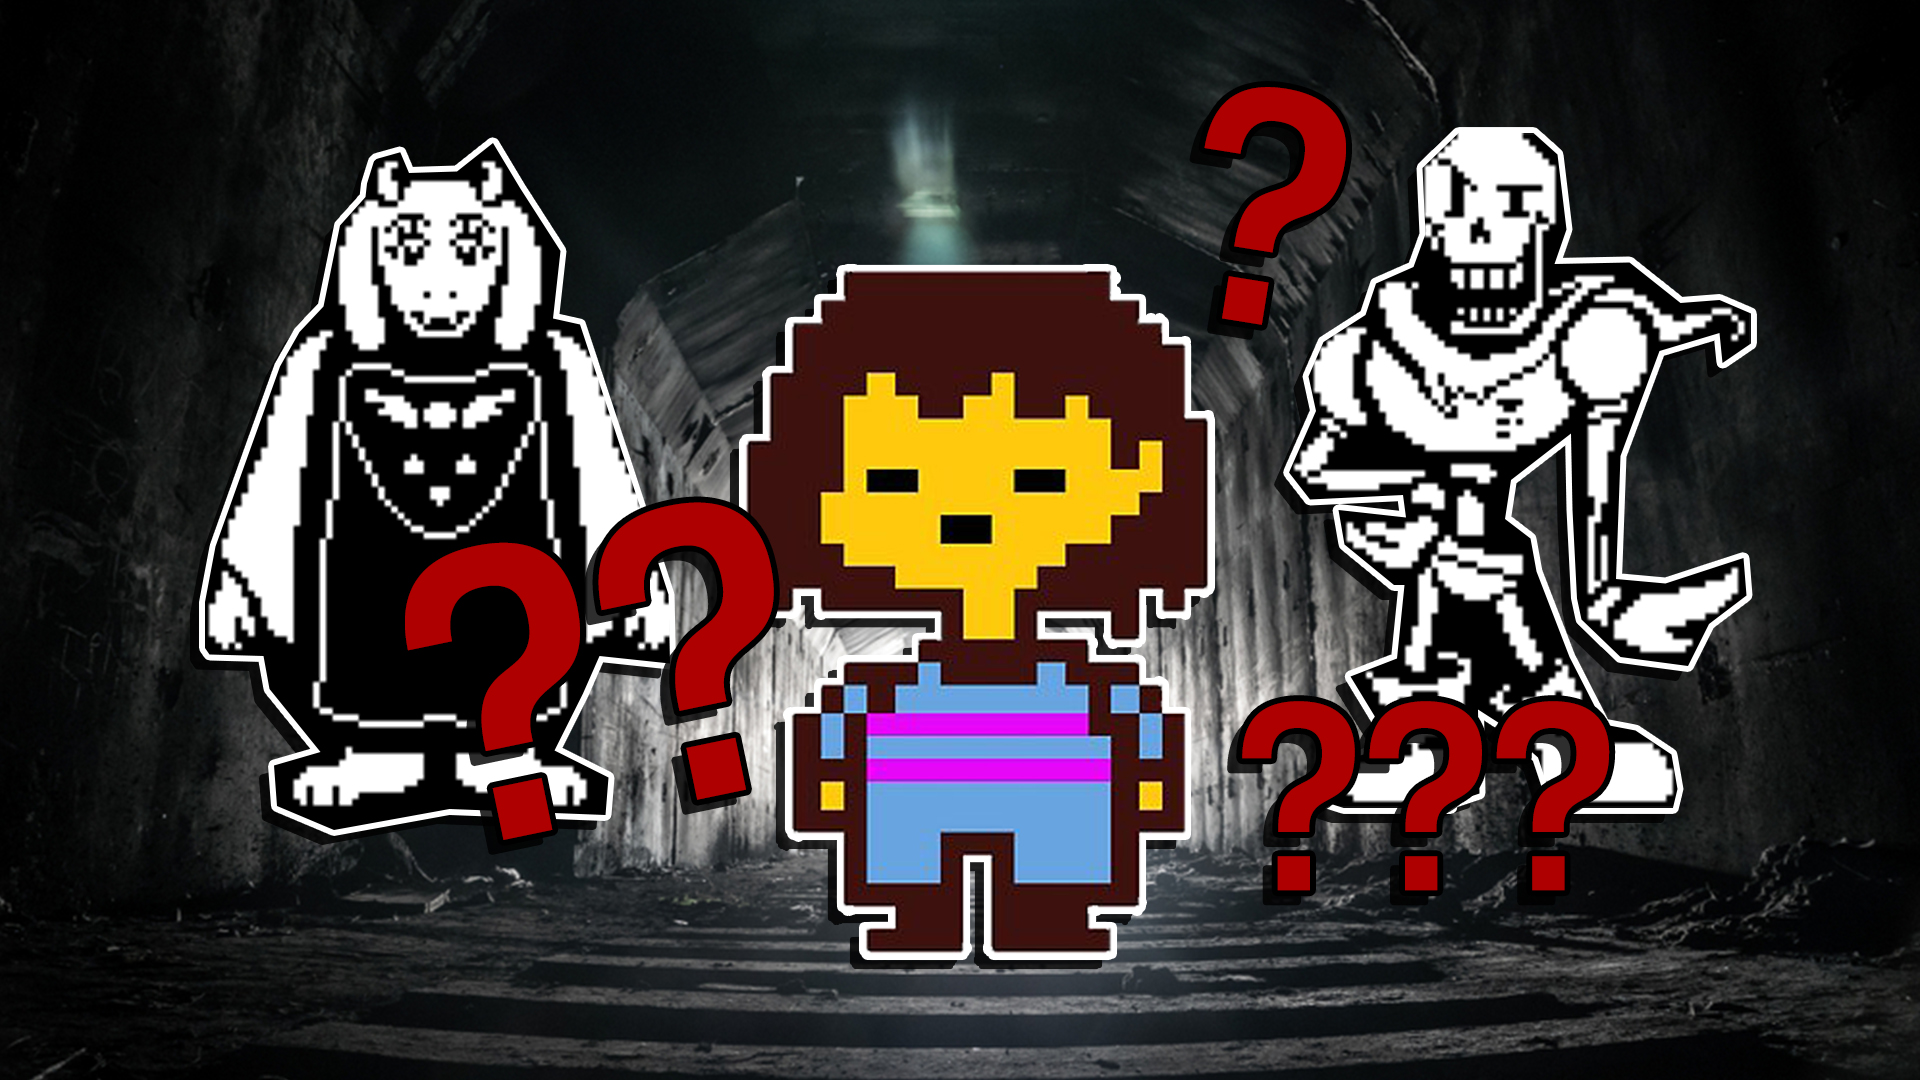 Undertale Quiz: Which Undertale Character Are You?